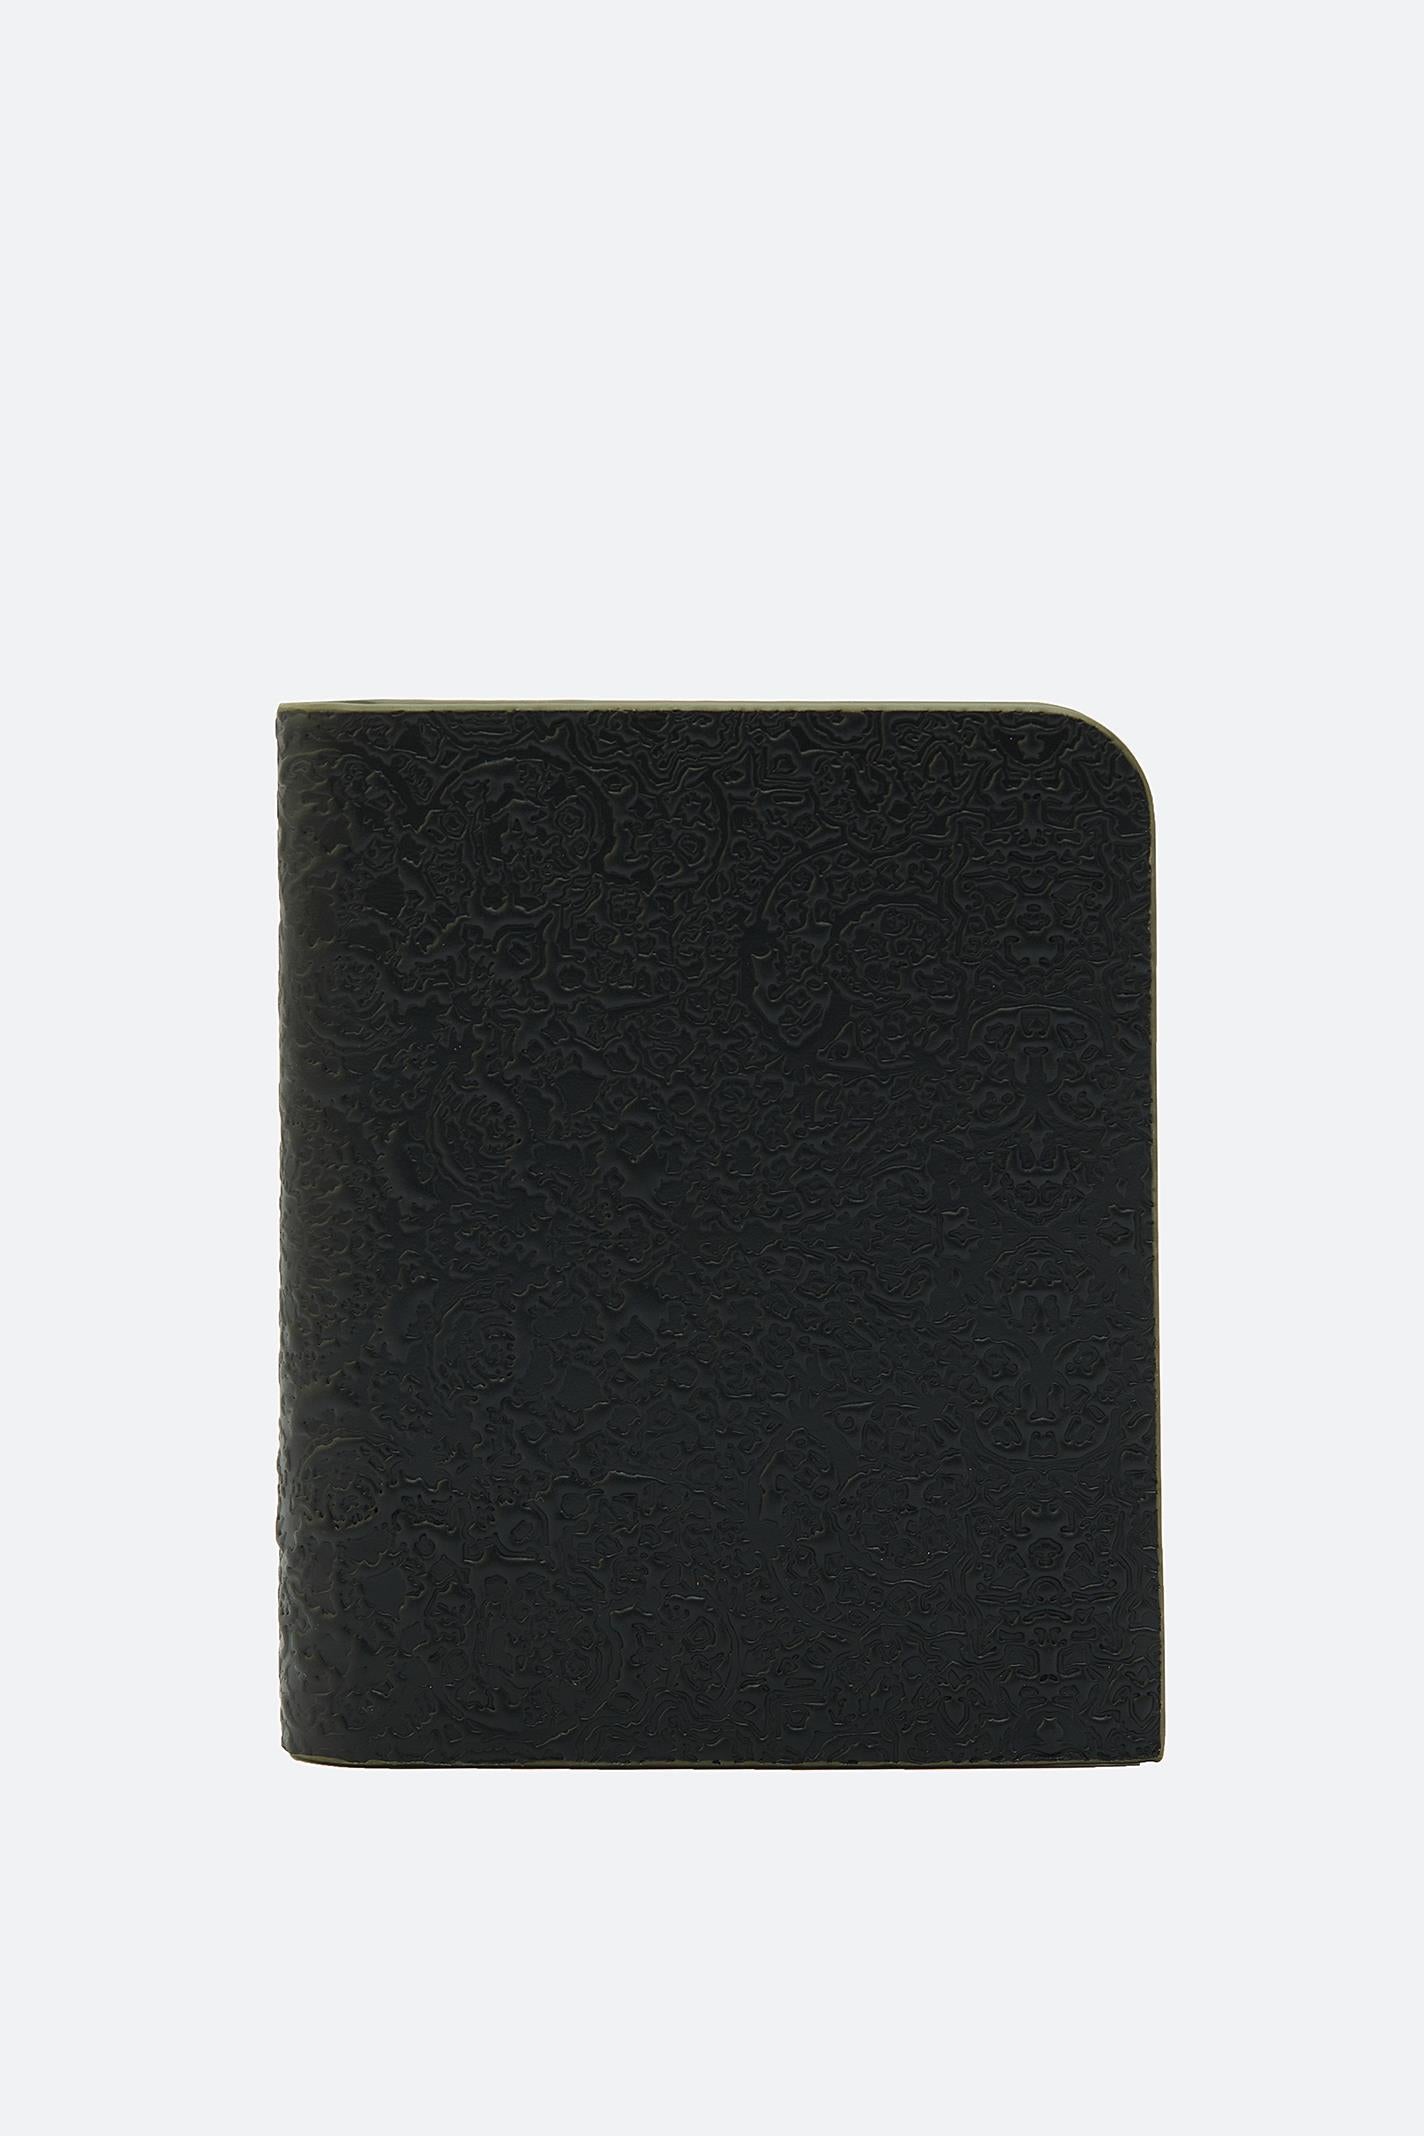  EMBOSSED LARGE ZIPPED WALLET 067